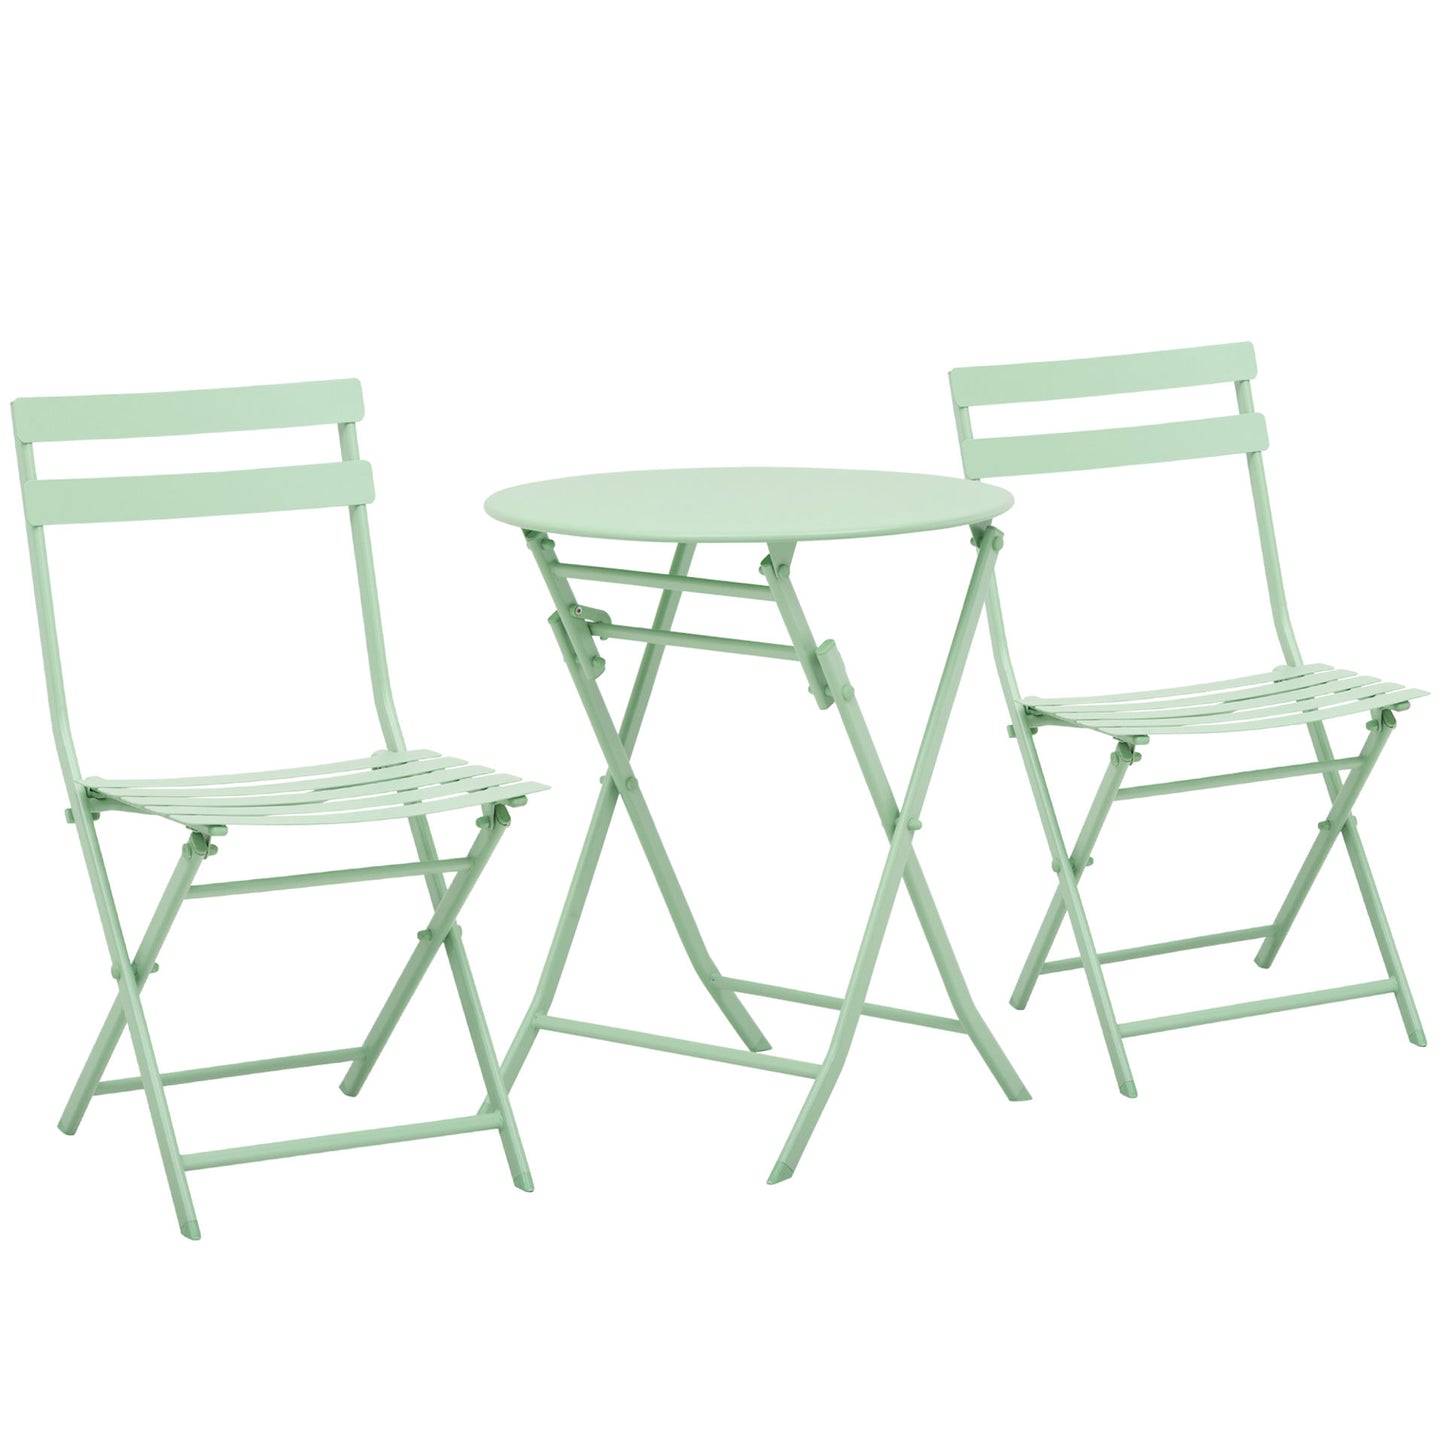 Nancy's Bremen Garden set for 2 people balcony furniture set bistro table with 2 chairs for garden foldable green